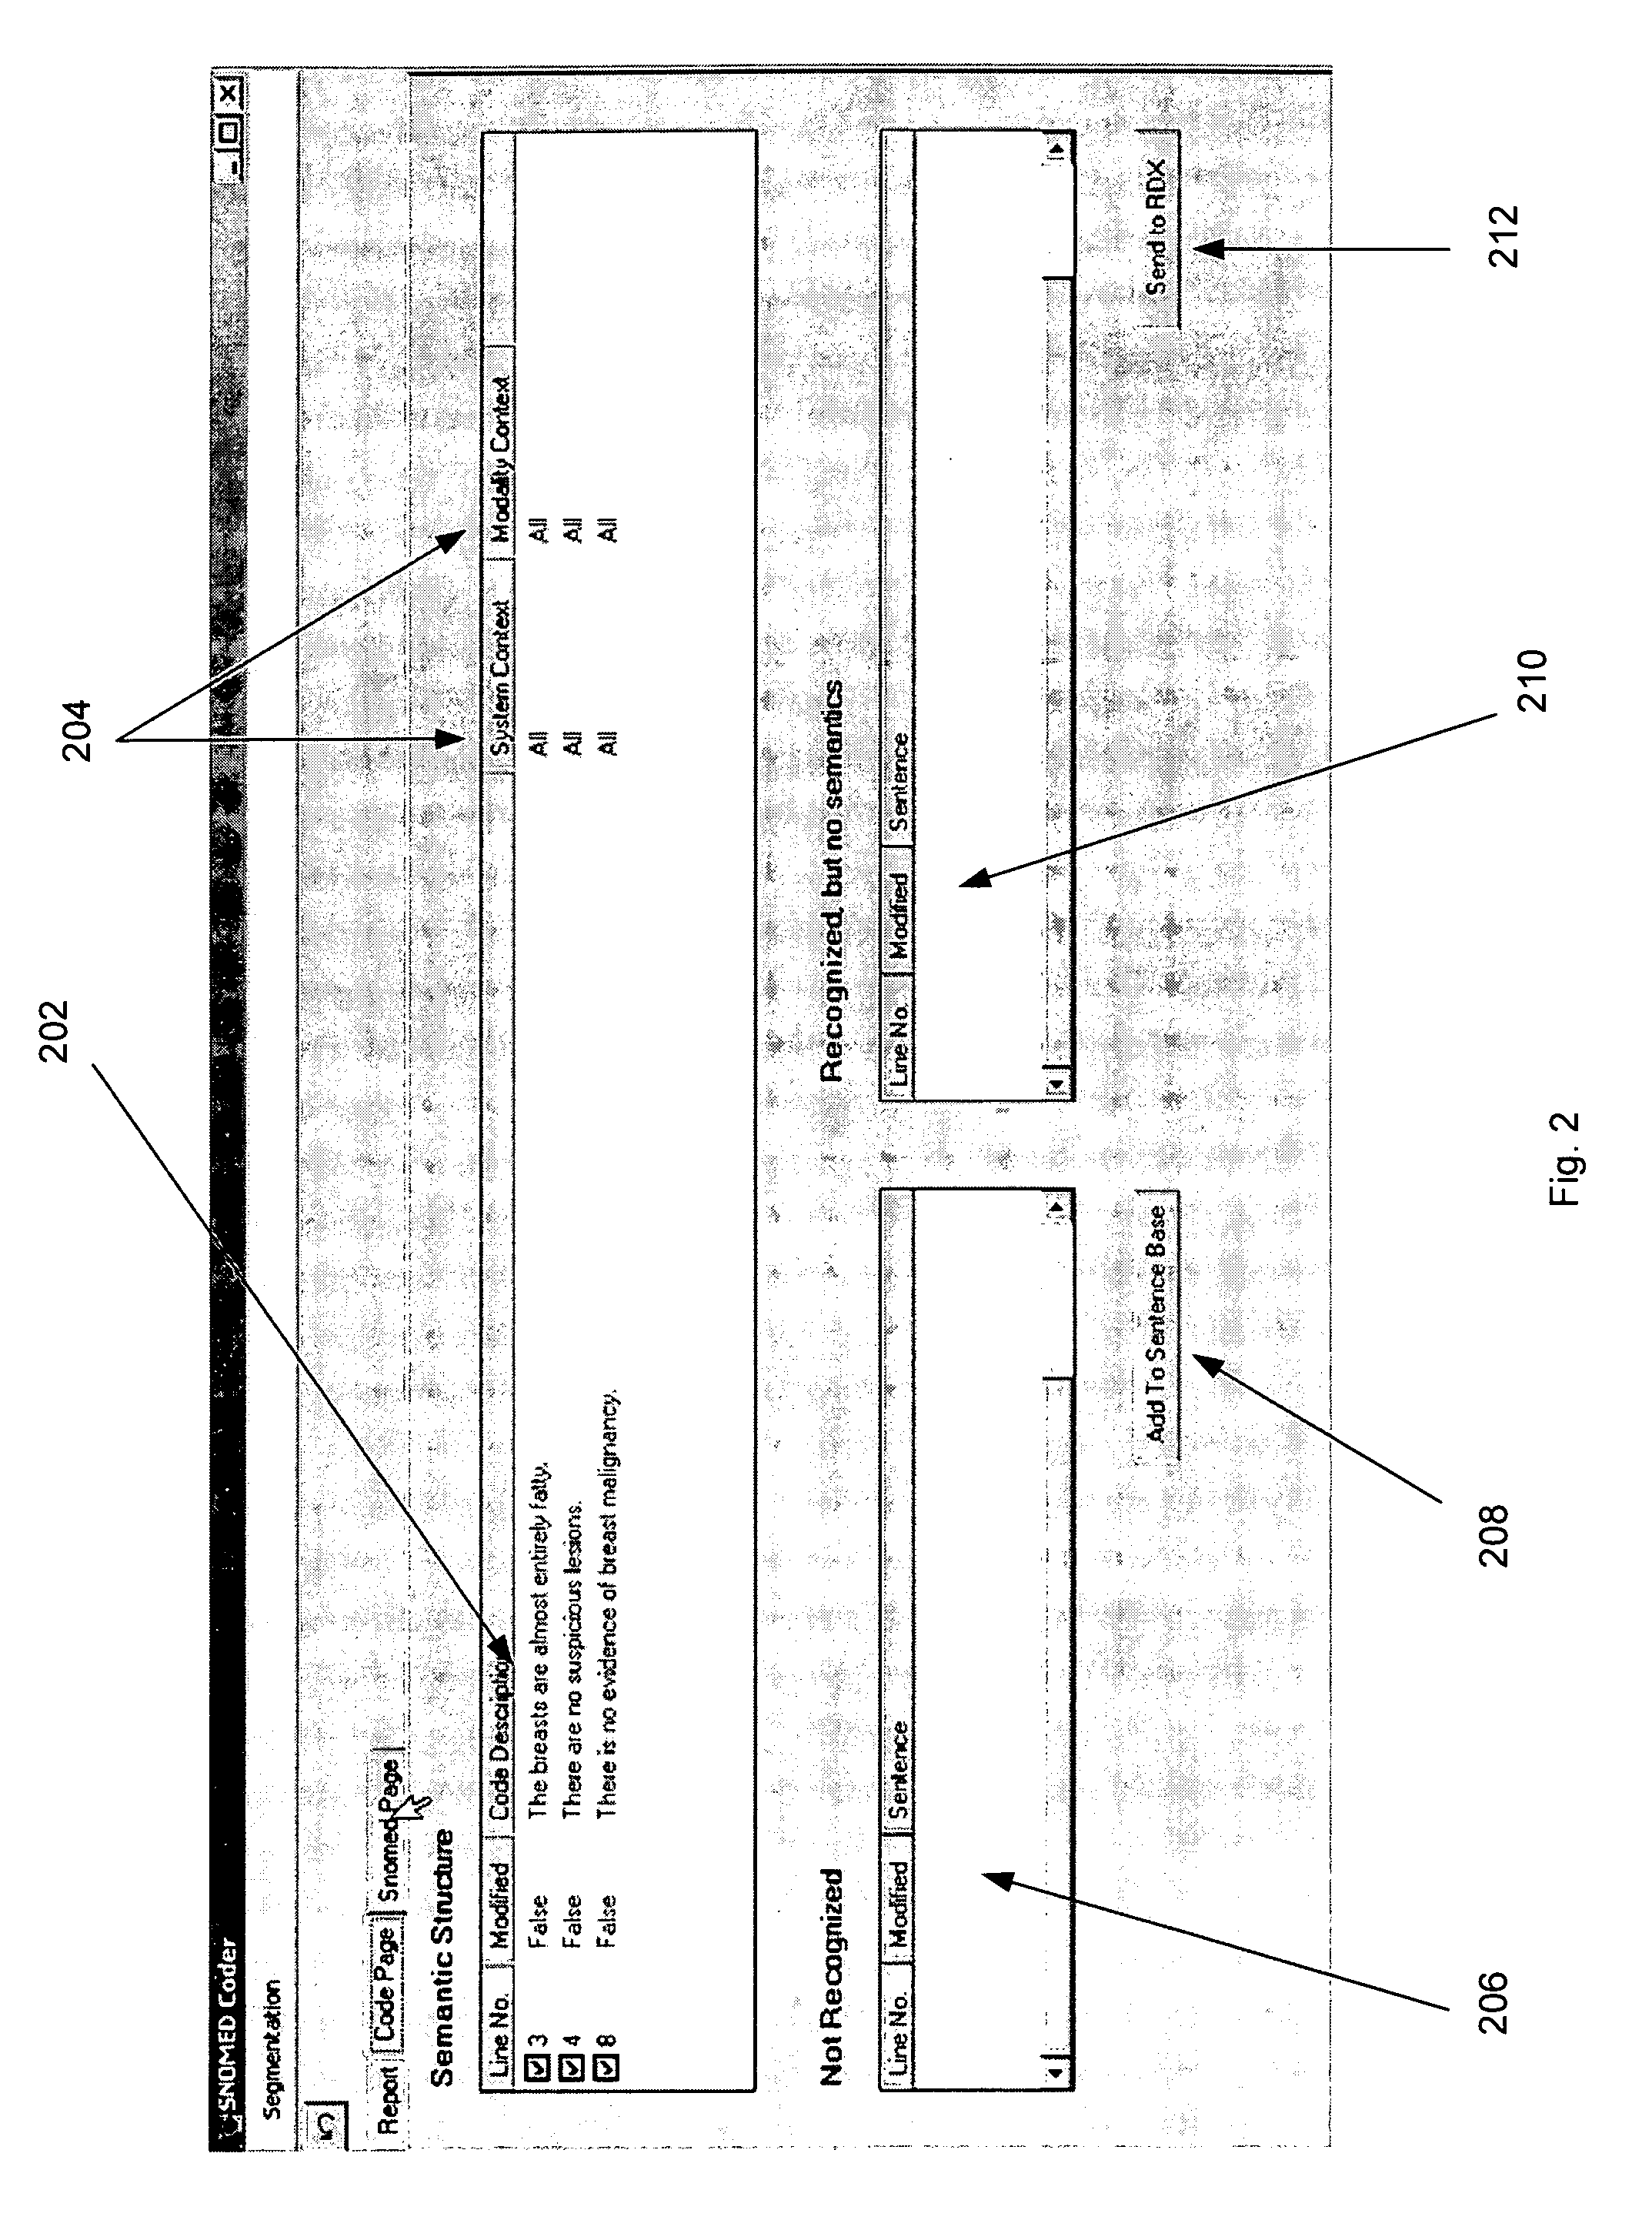 Process and system for high precision coding of free text documents against a standard lexicon